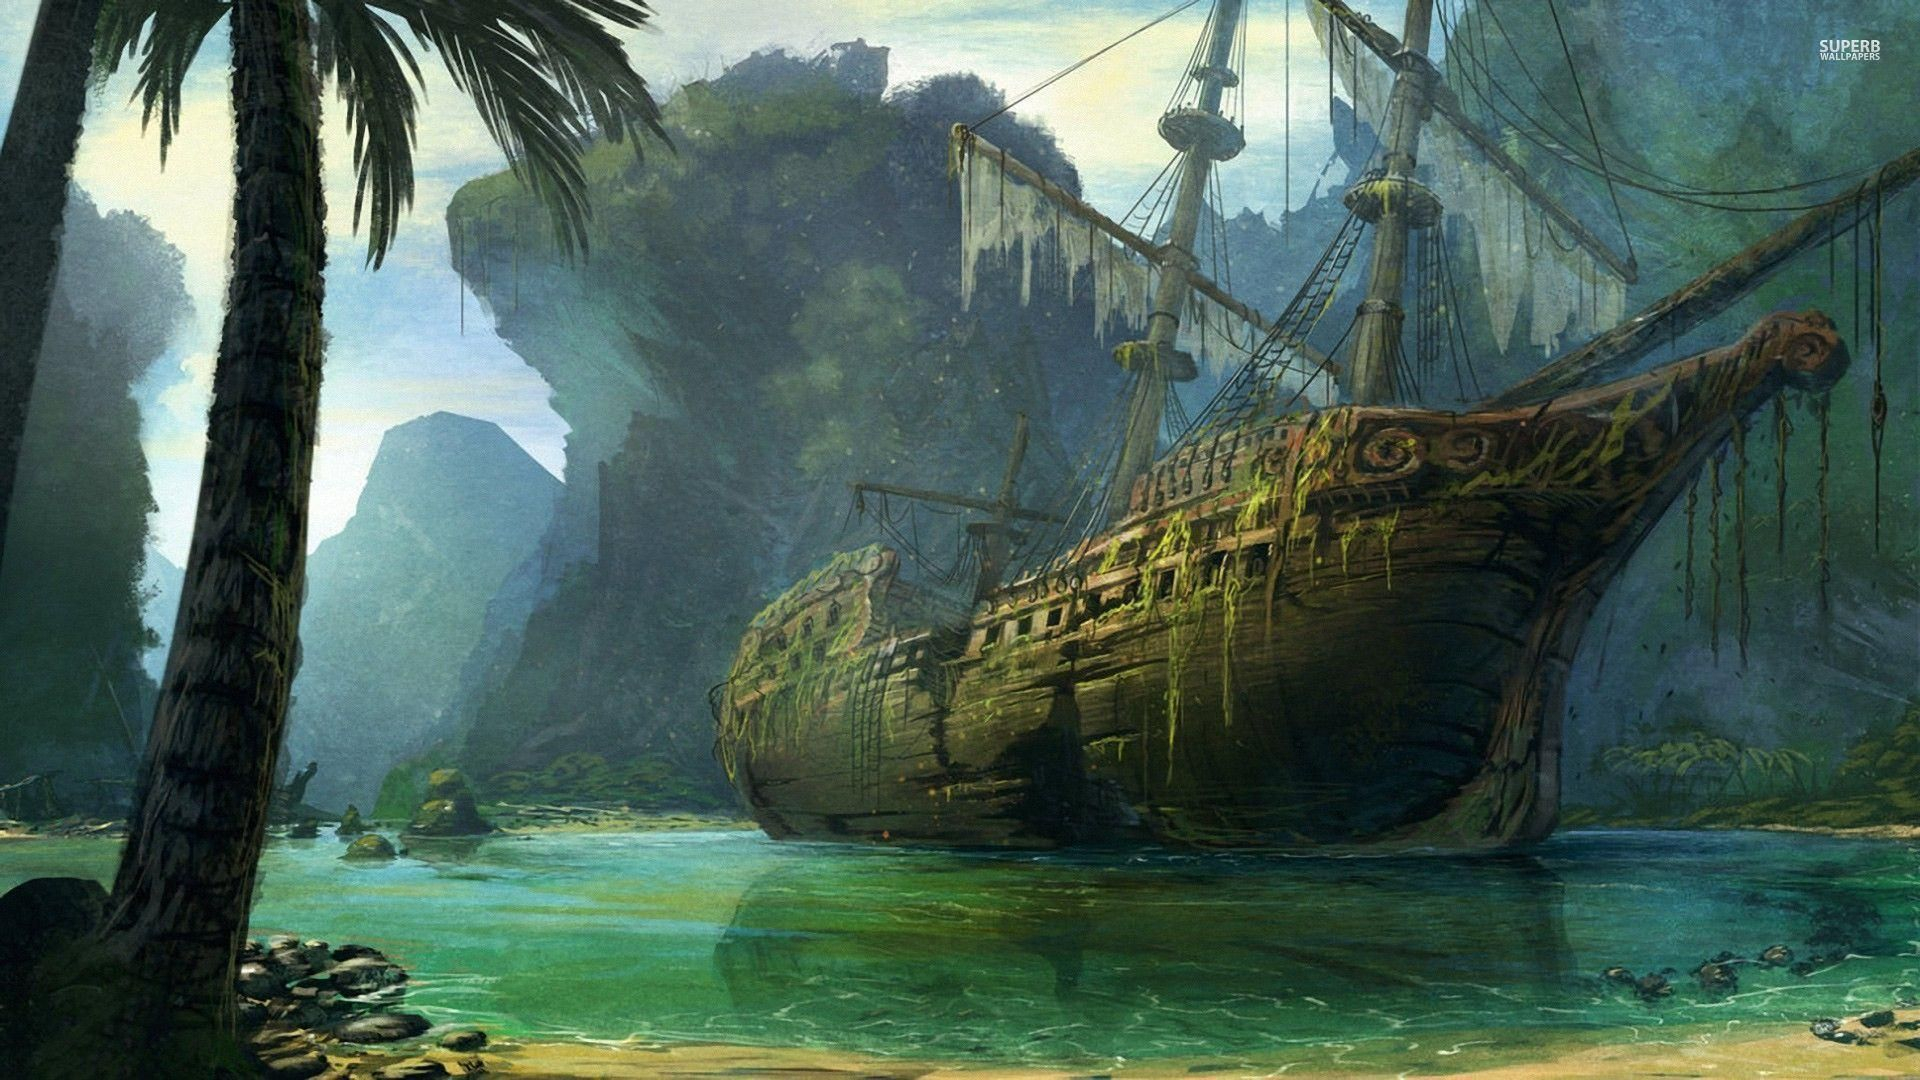 1920x1080 pictures of pirates | Pirate Ship Wallpapers | Fantasy landscape, Pirate island, Pirate art